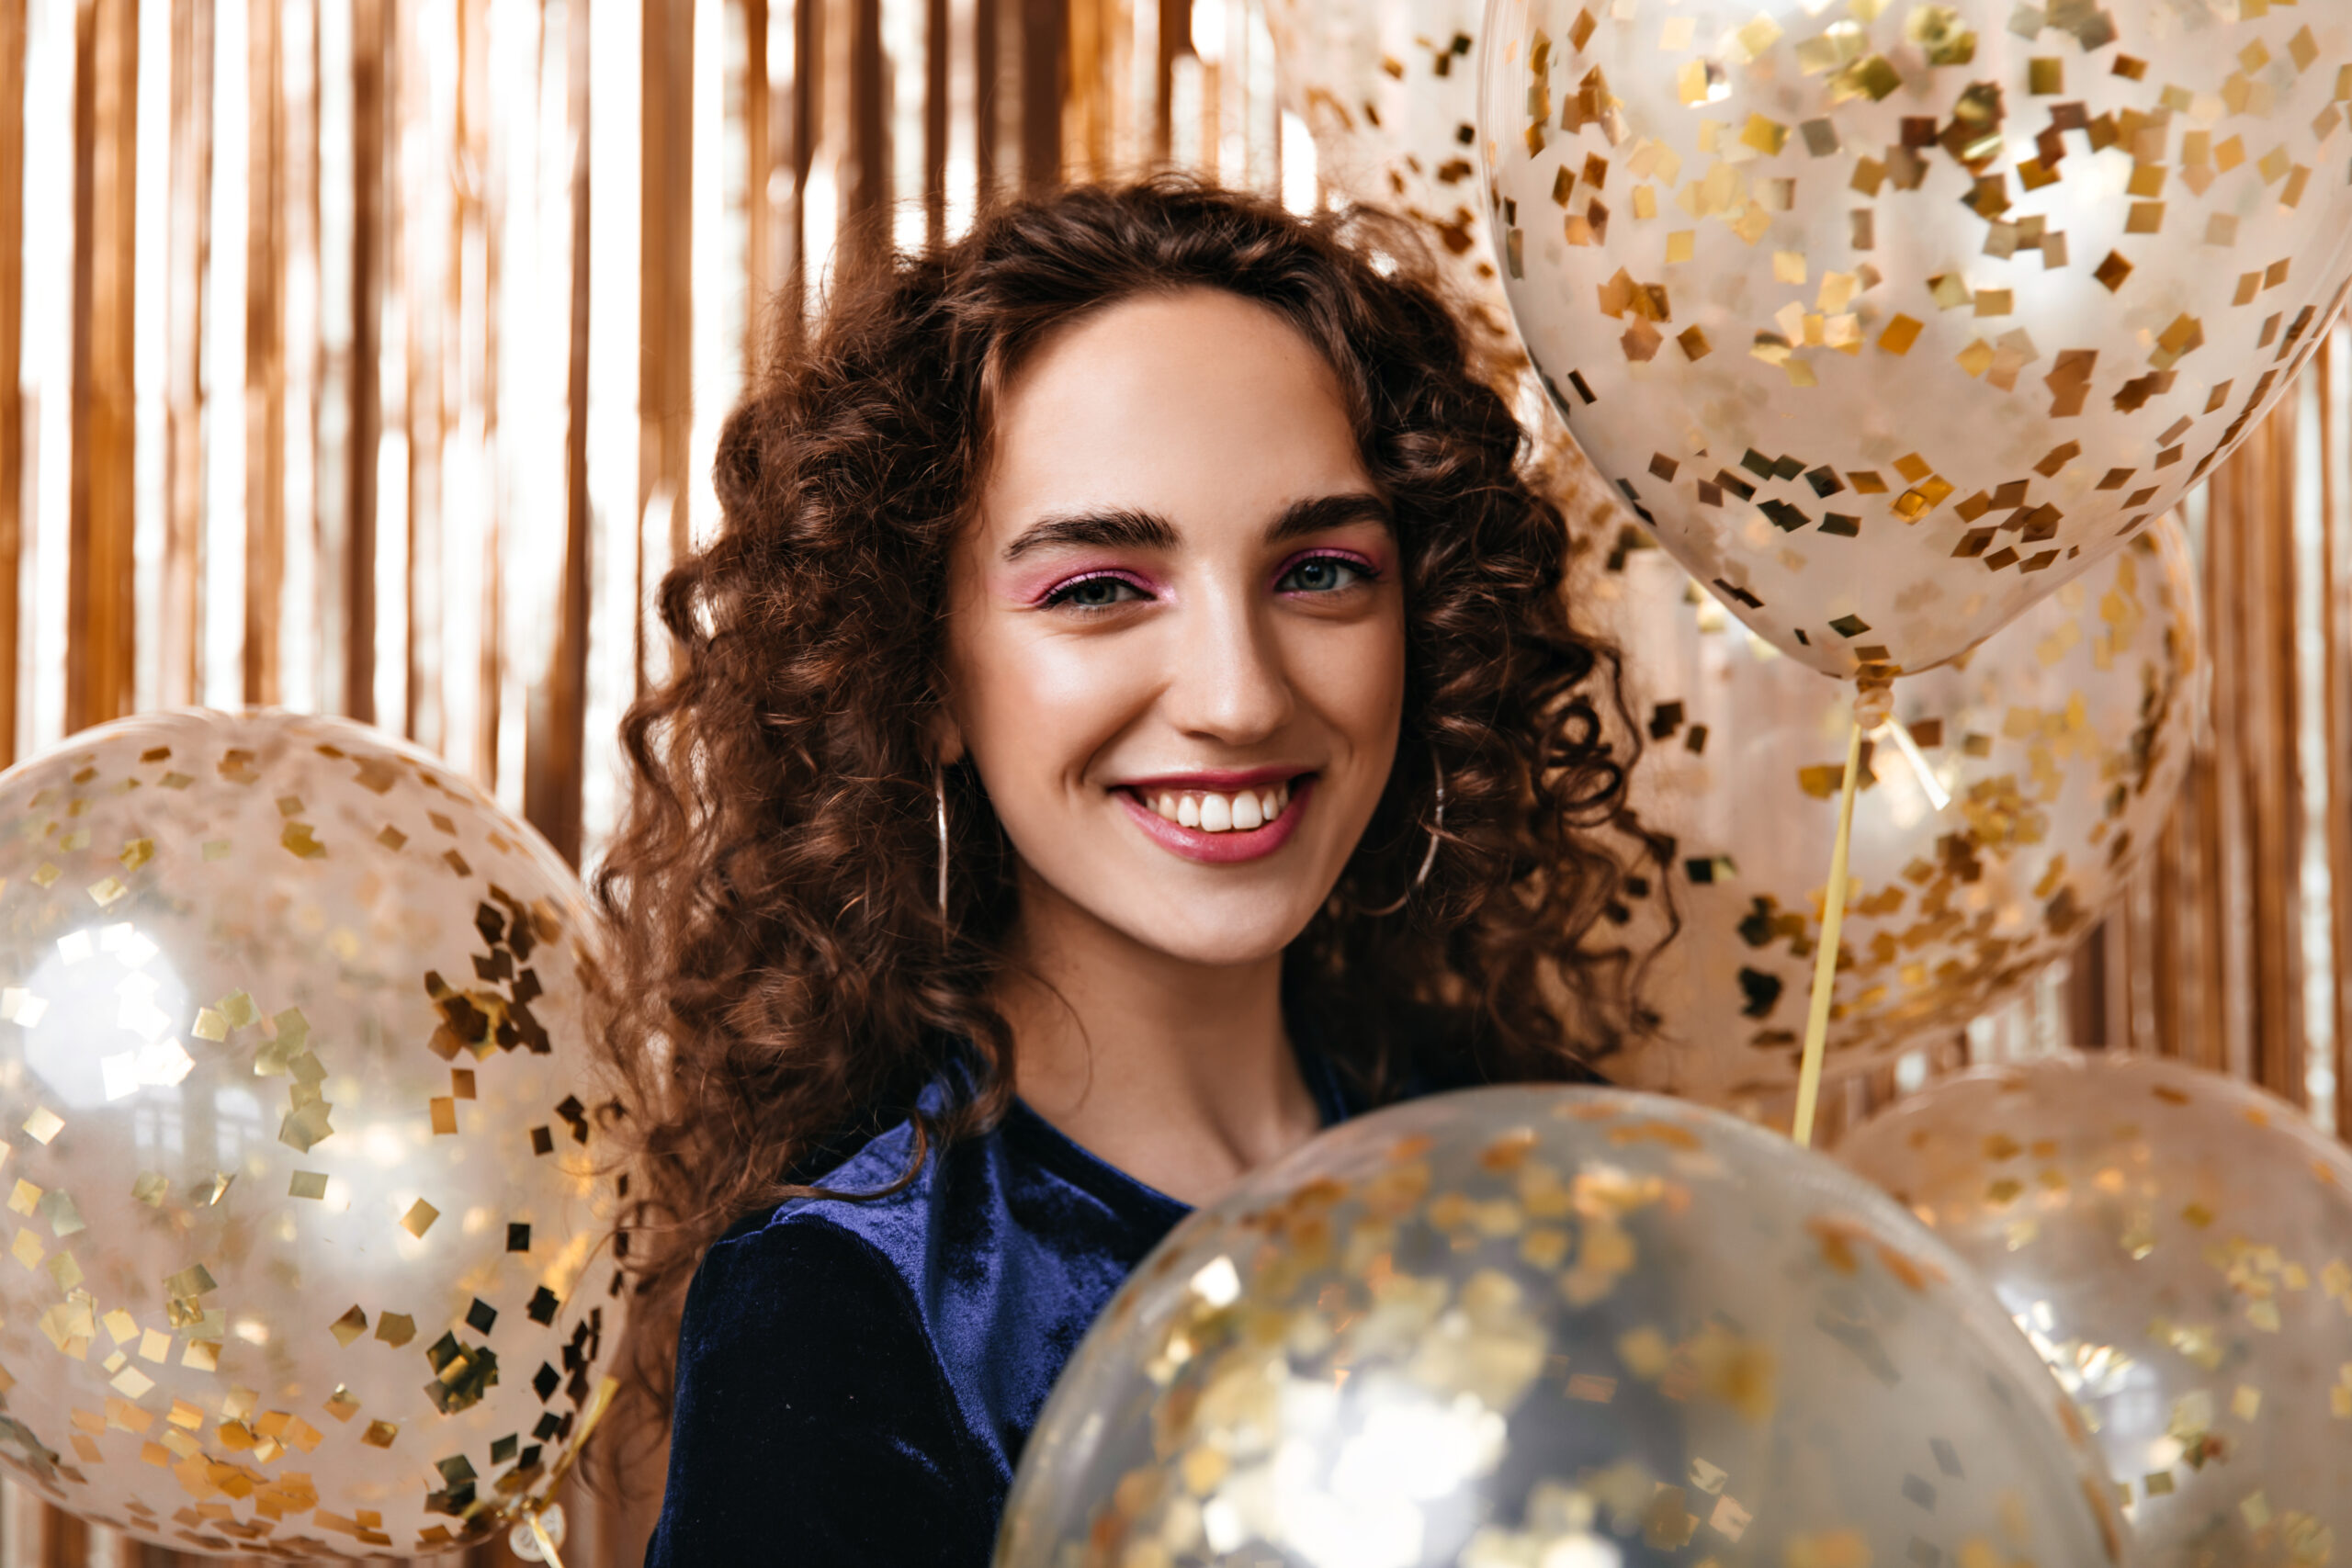 Beautiful girl with pink eyeshadows winks on gold background with balloons